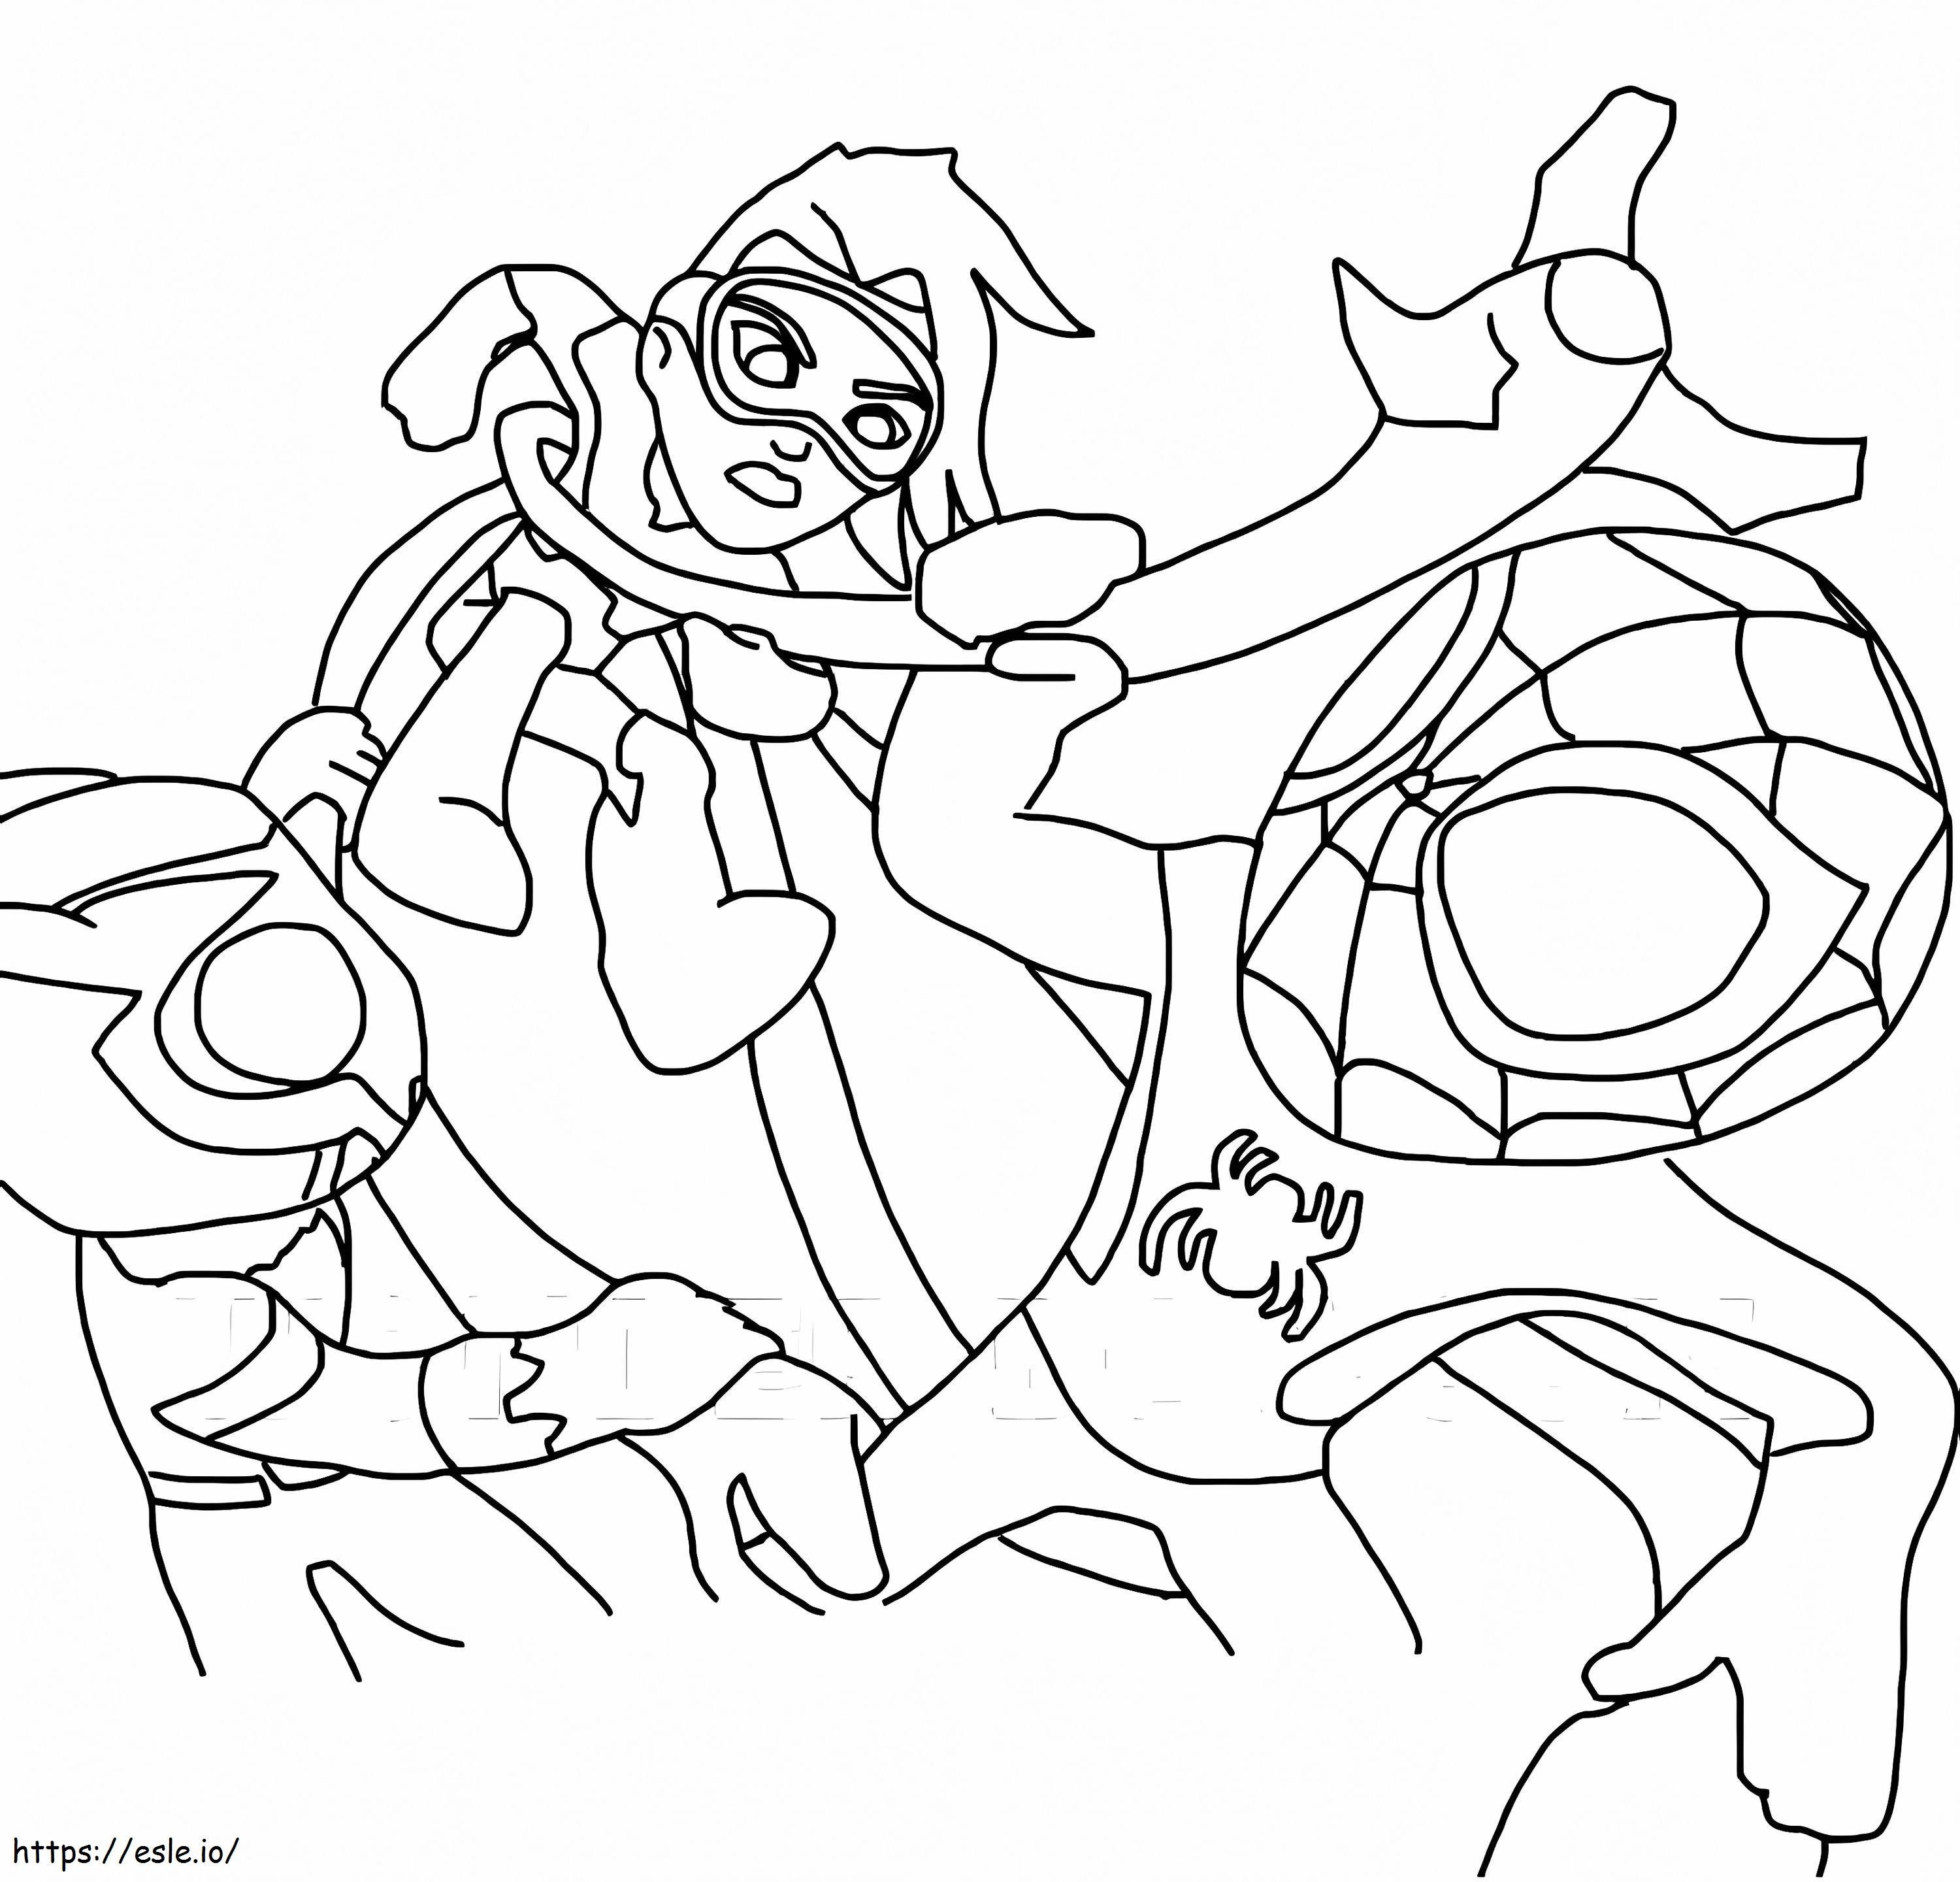 Doctor Octopus Vs Spidey coloring page